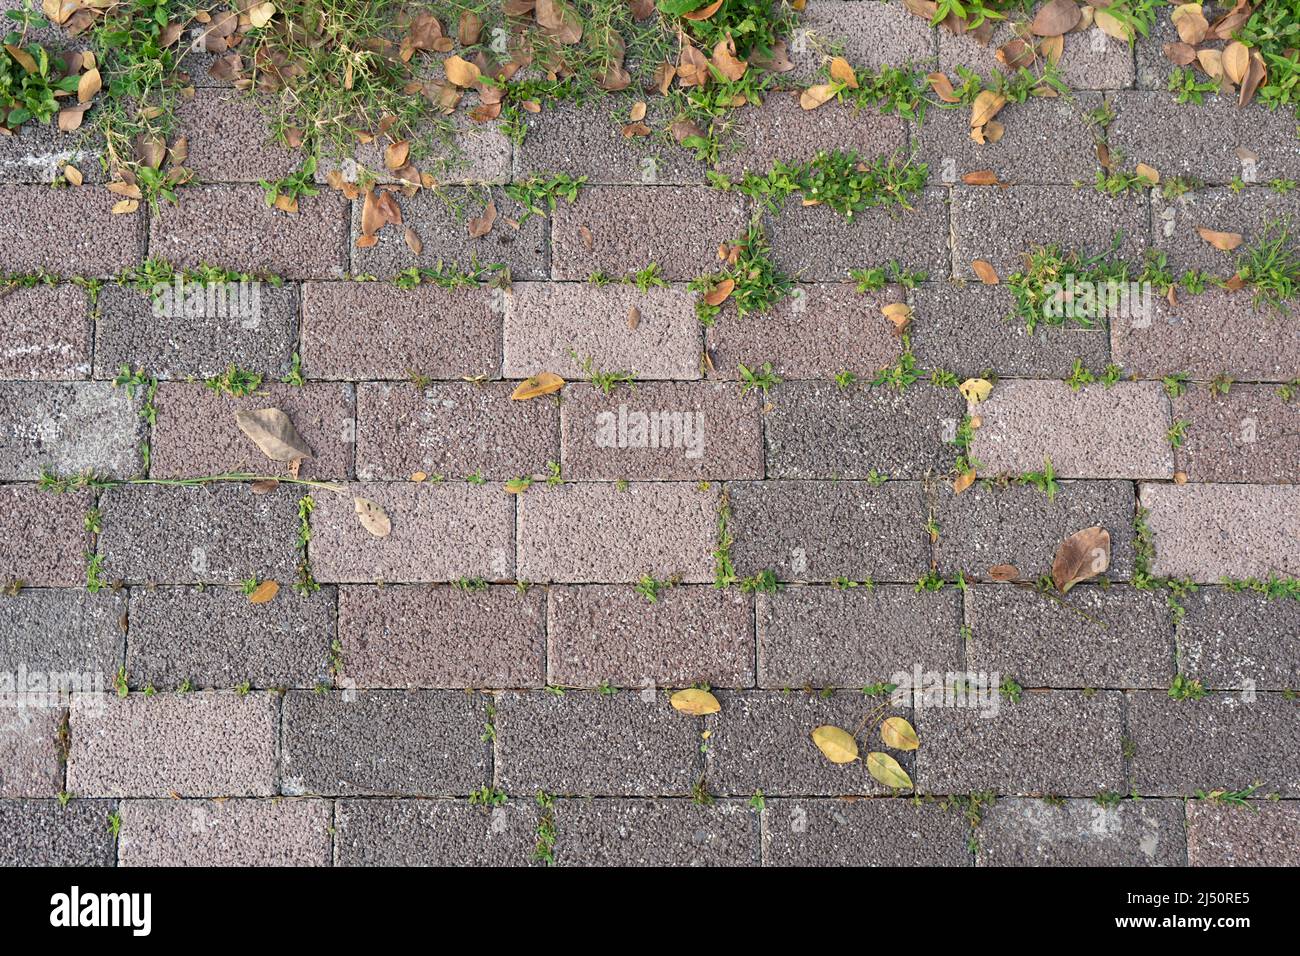 Brick road with grass and yellow leaves Stock Photo